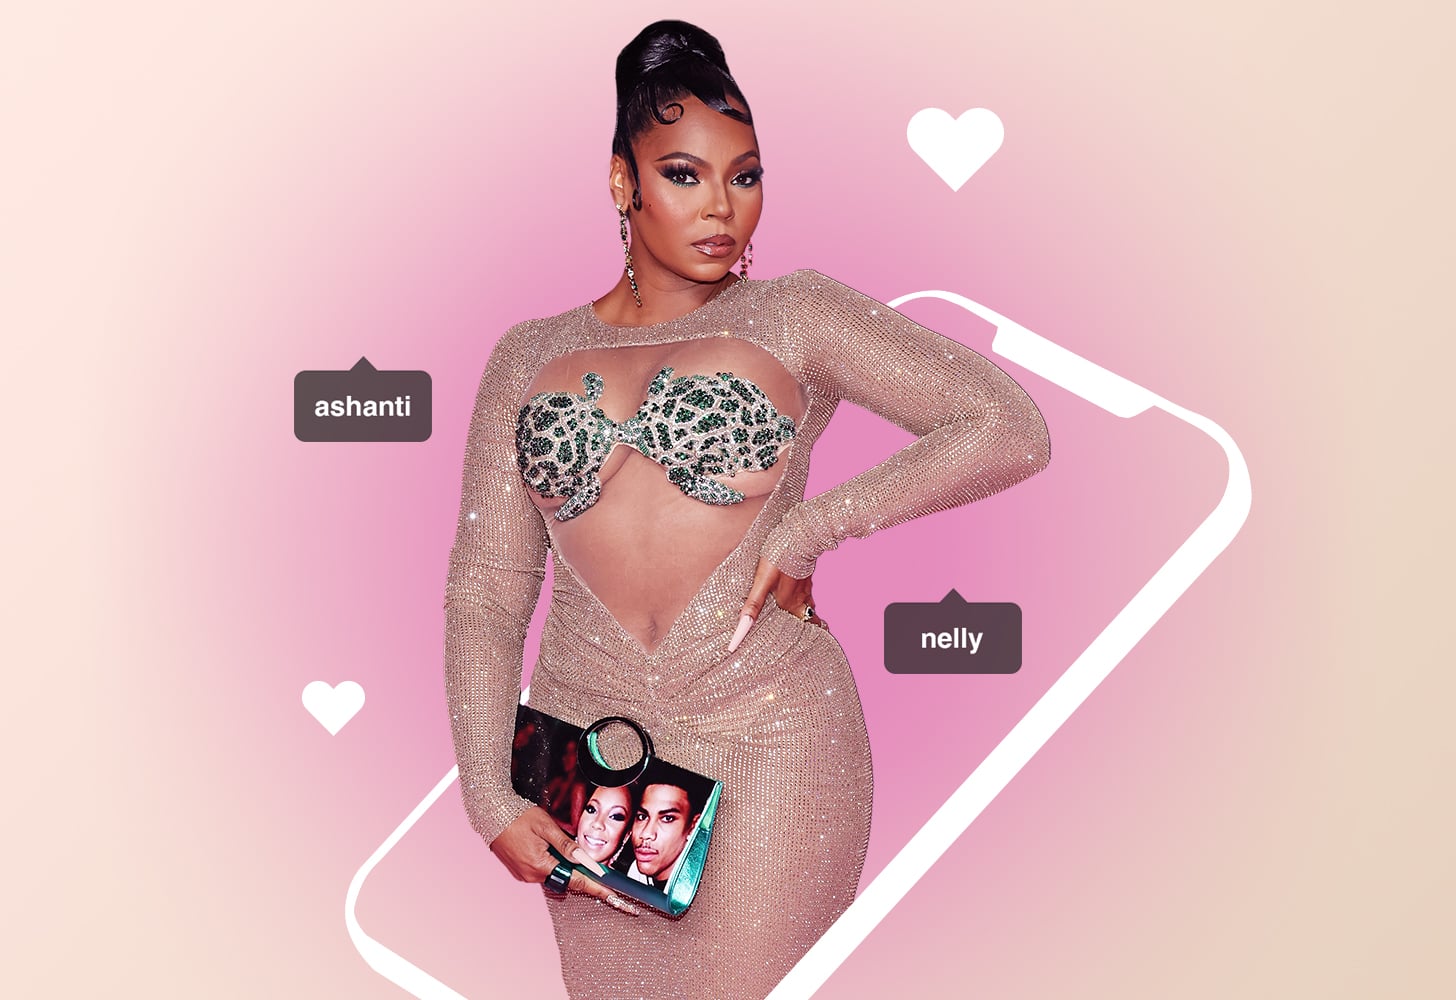 photo of Ashanti with clutch showing her and Nelly to represent hard launching relationships trend